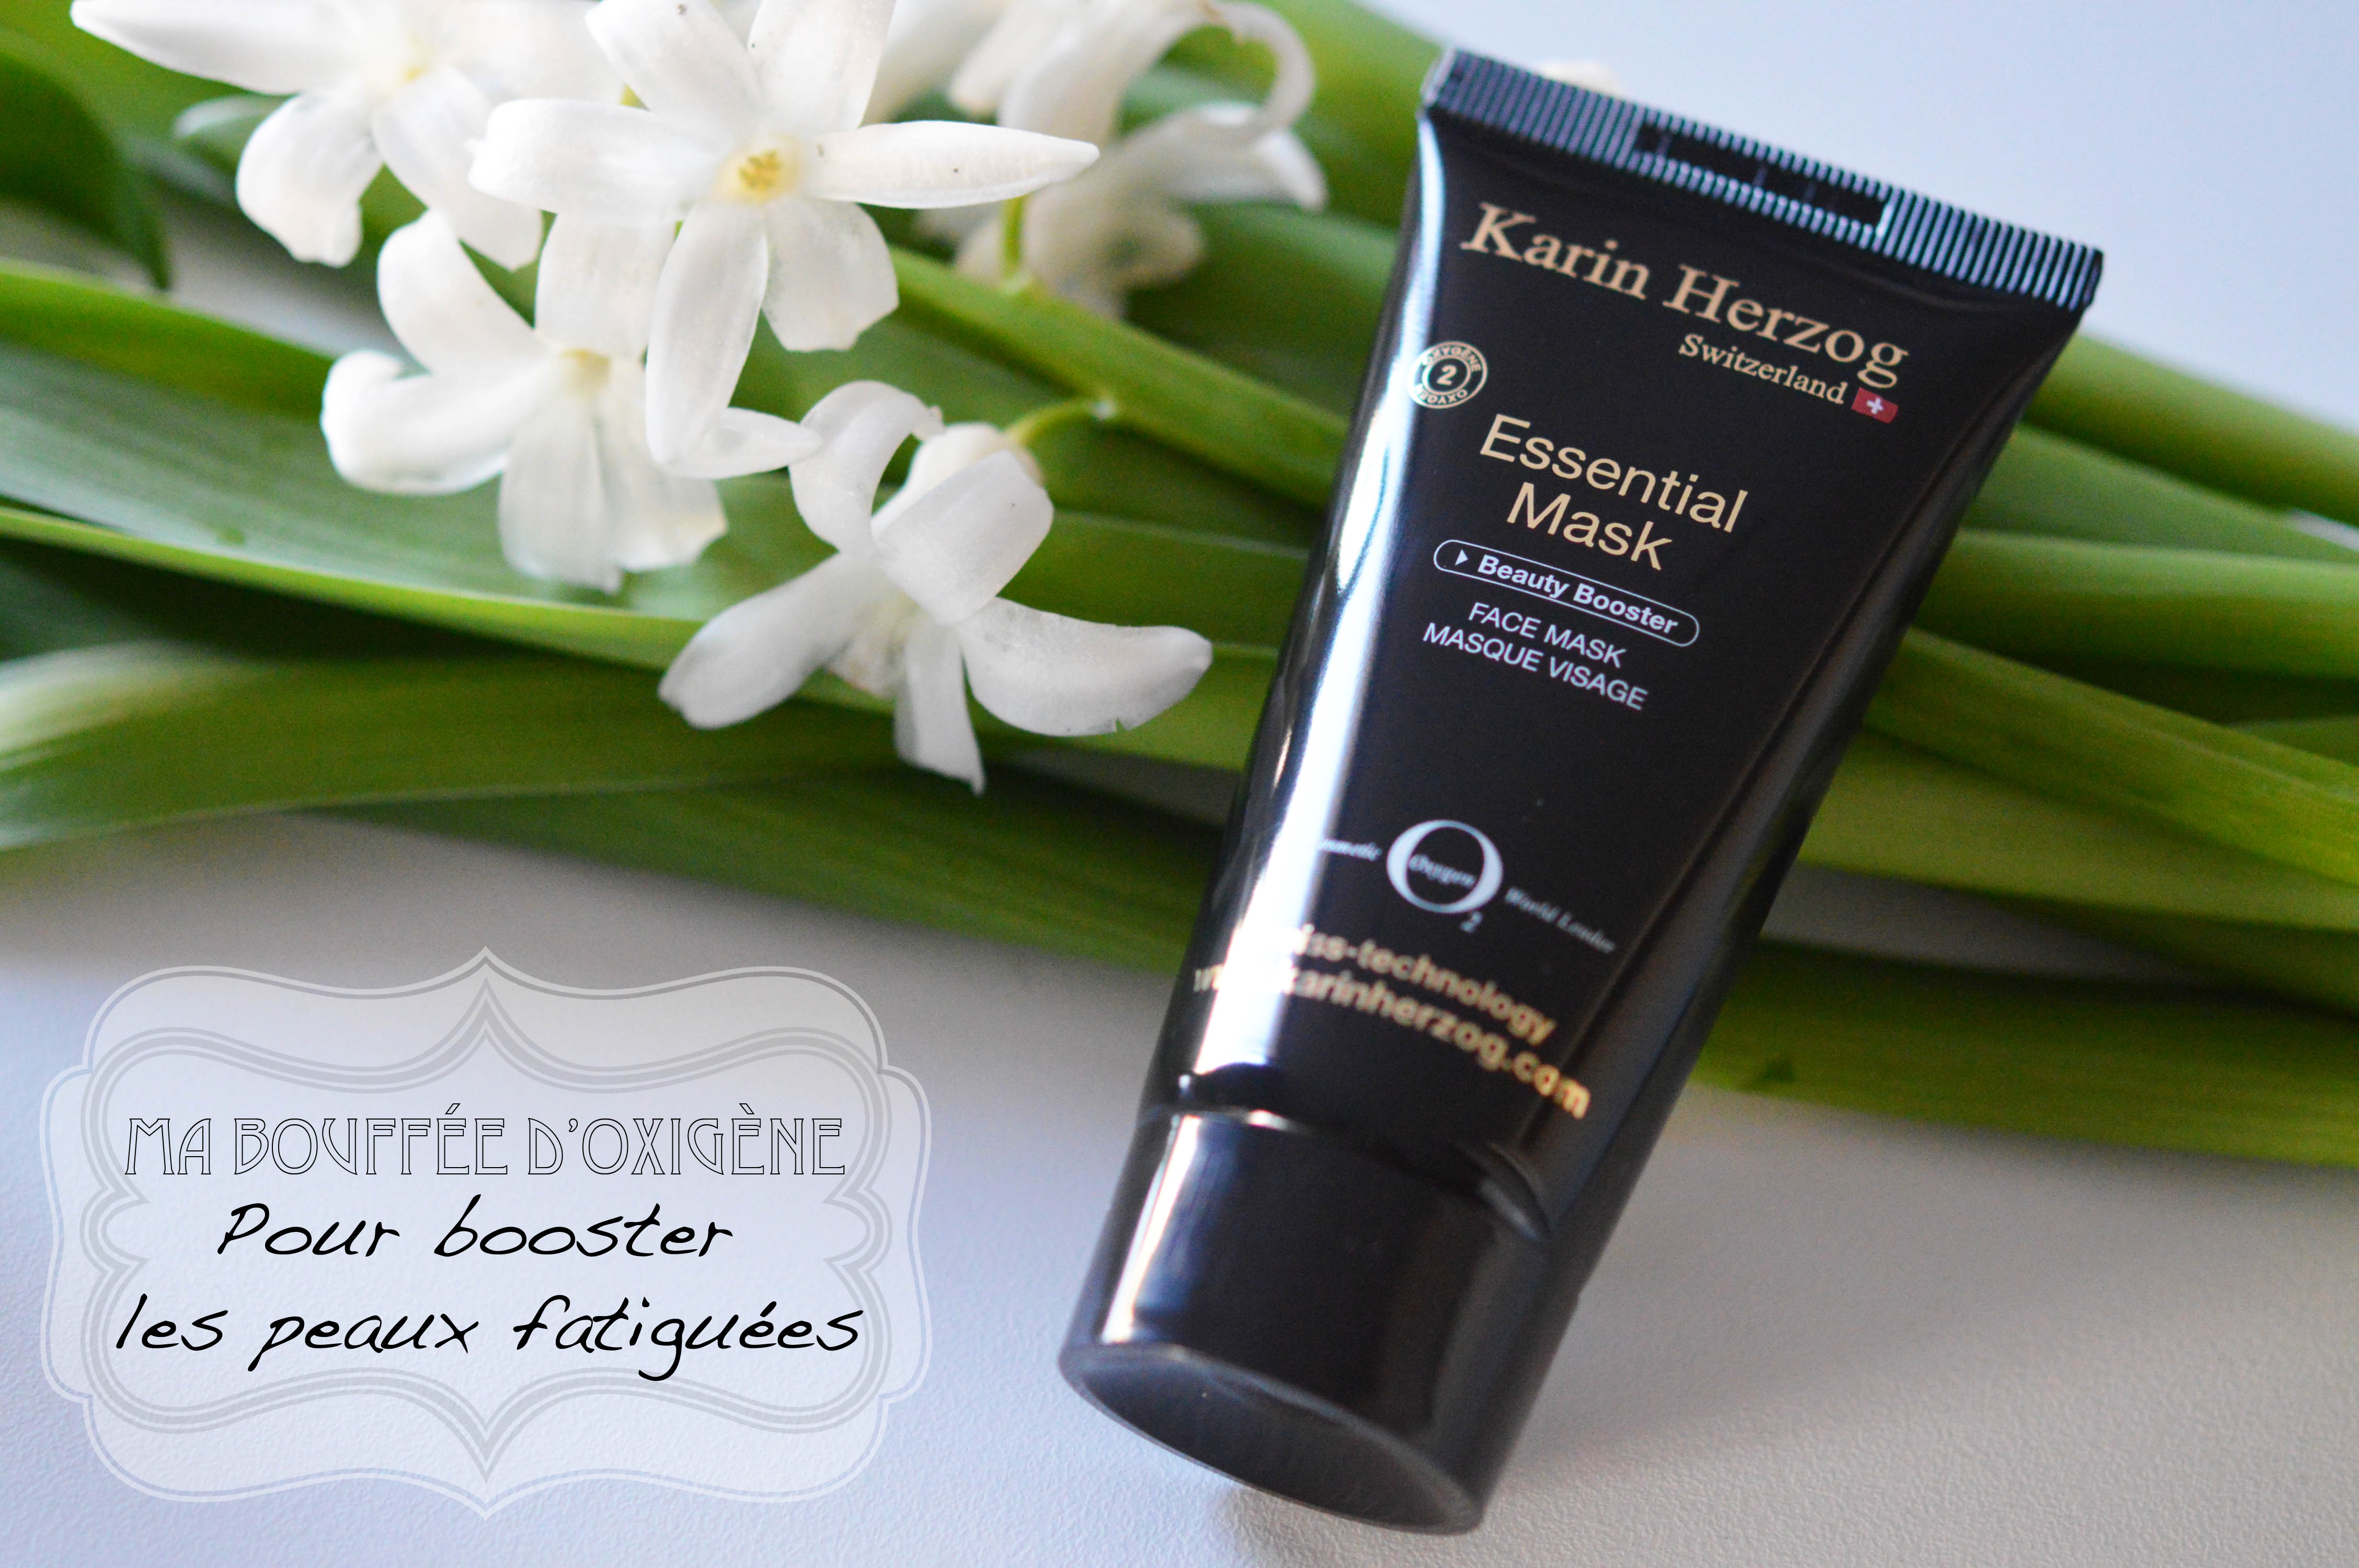 ALITTLEB_BLOG_BEAUTE_KARIN_HERZOG_BEAUTYBOOSTER_ESSENTIAL_MASK_A_LOXIGENE_POUR_PEAUX_FATIGUEES